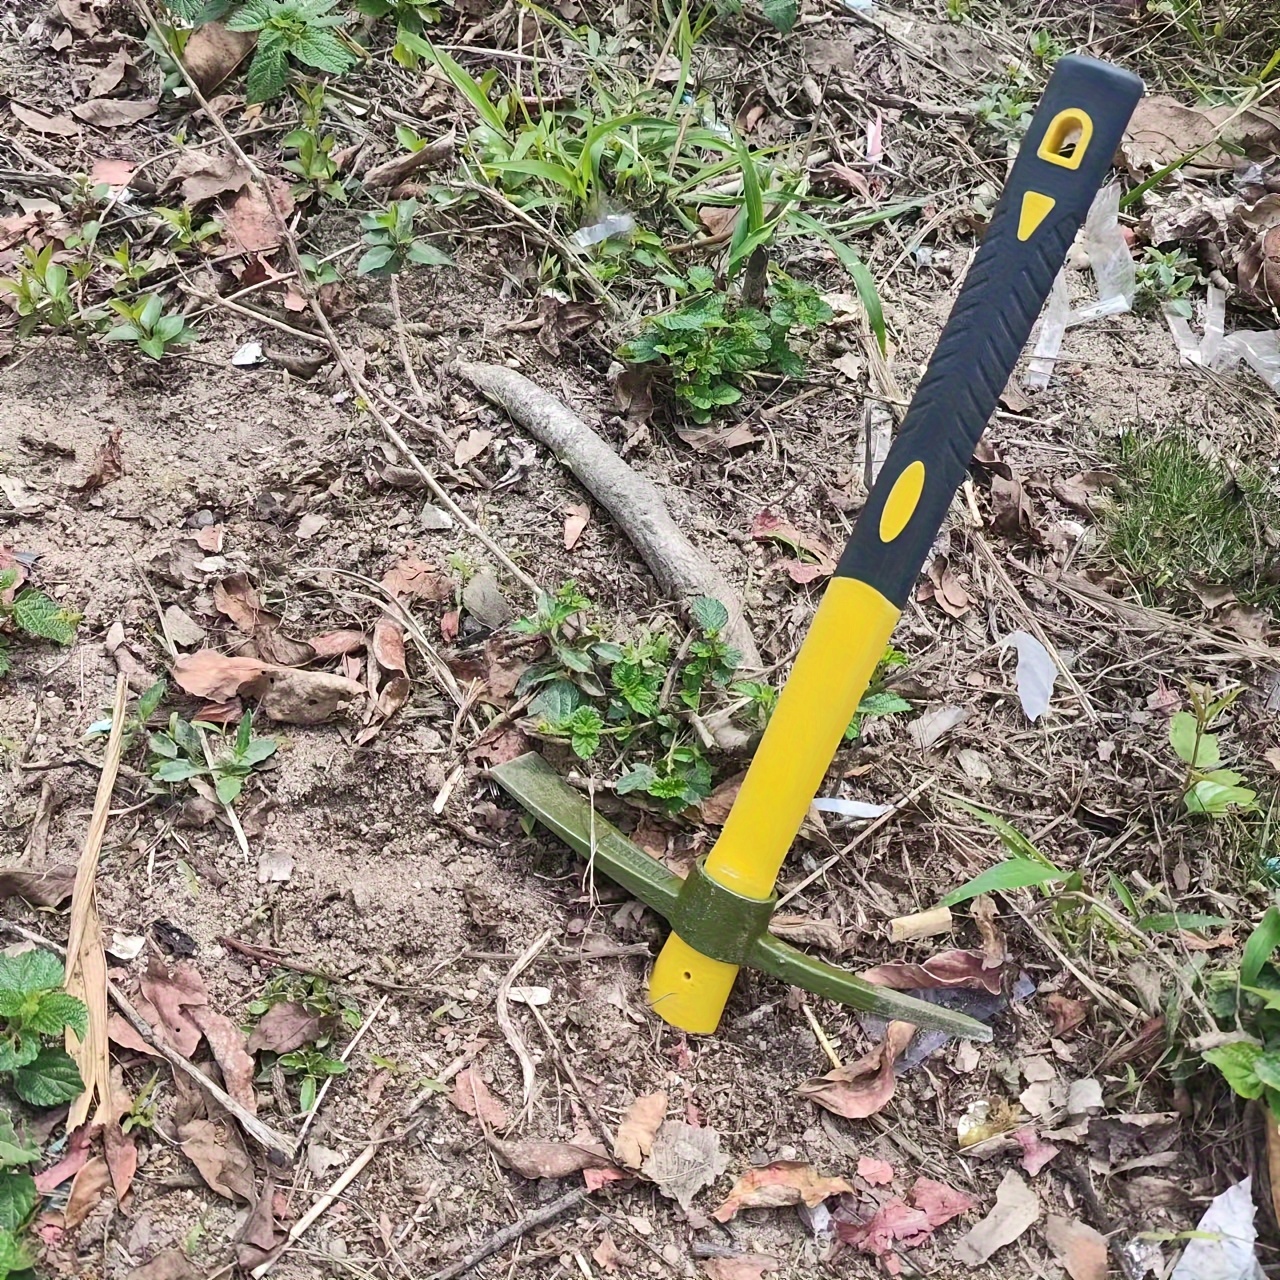 

1pc Pickaxe, Fiber Plastic Handle, Hand-held, Used For Planting Flowers And Vegetables, Can Loosen Soil, Dig Trees, Dig Medicine, Outdoor Camping Adventure Survey, Detachable, Easy To Carry